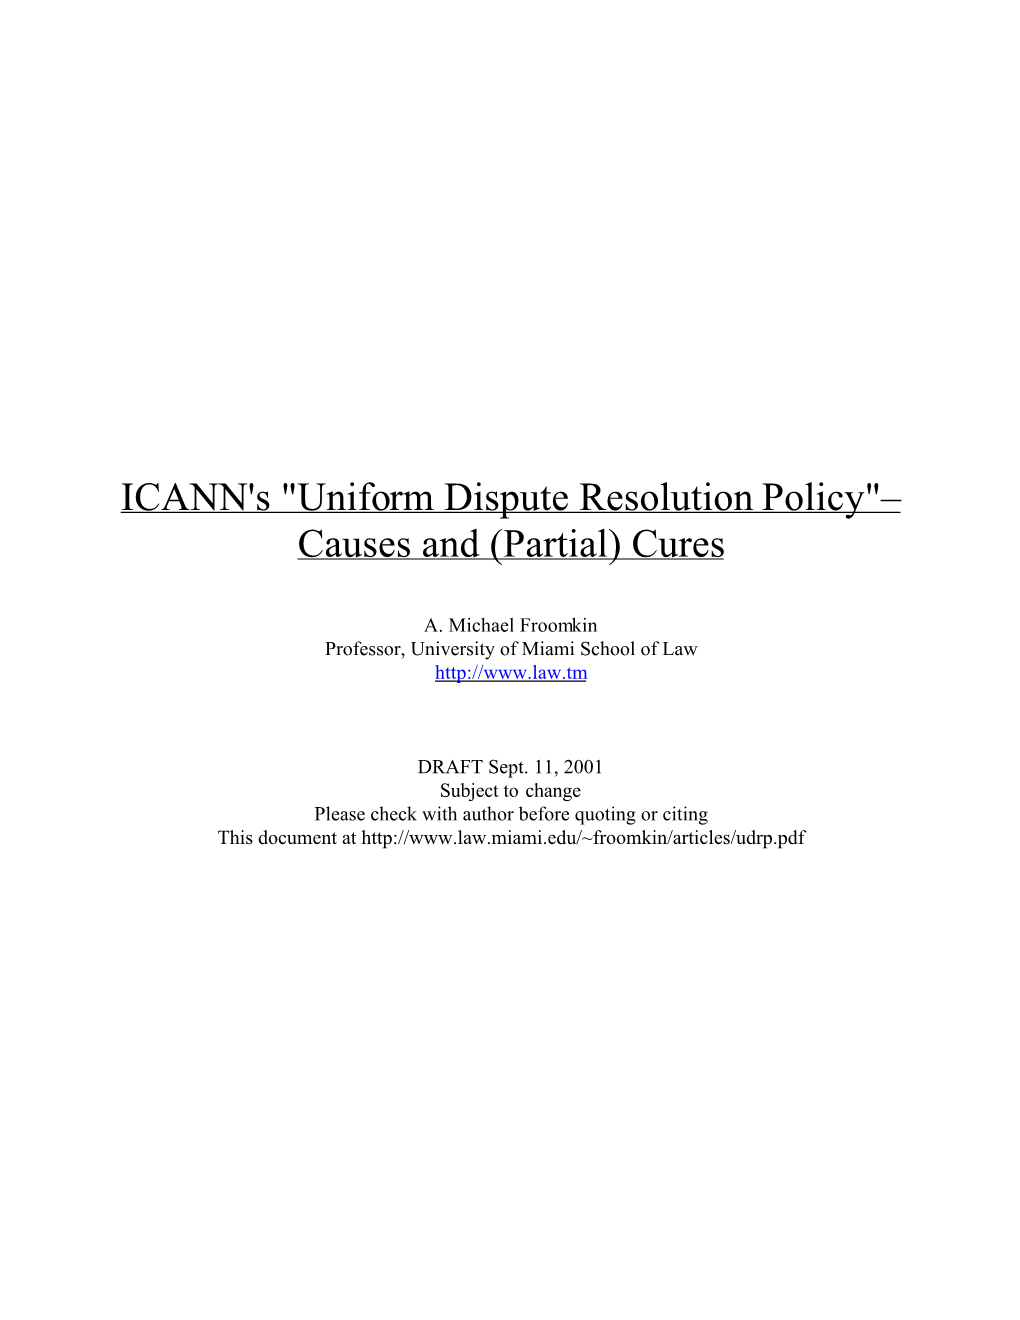 ICANN's "Uniform Dispute Resolution Policy"– Causes and (Partial) Cures